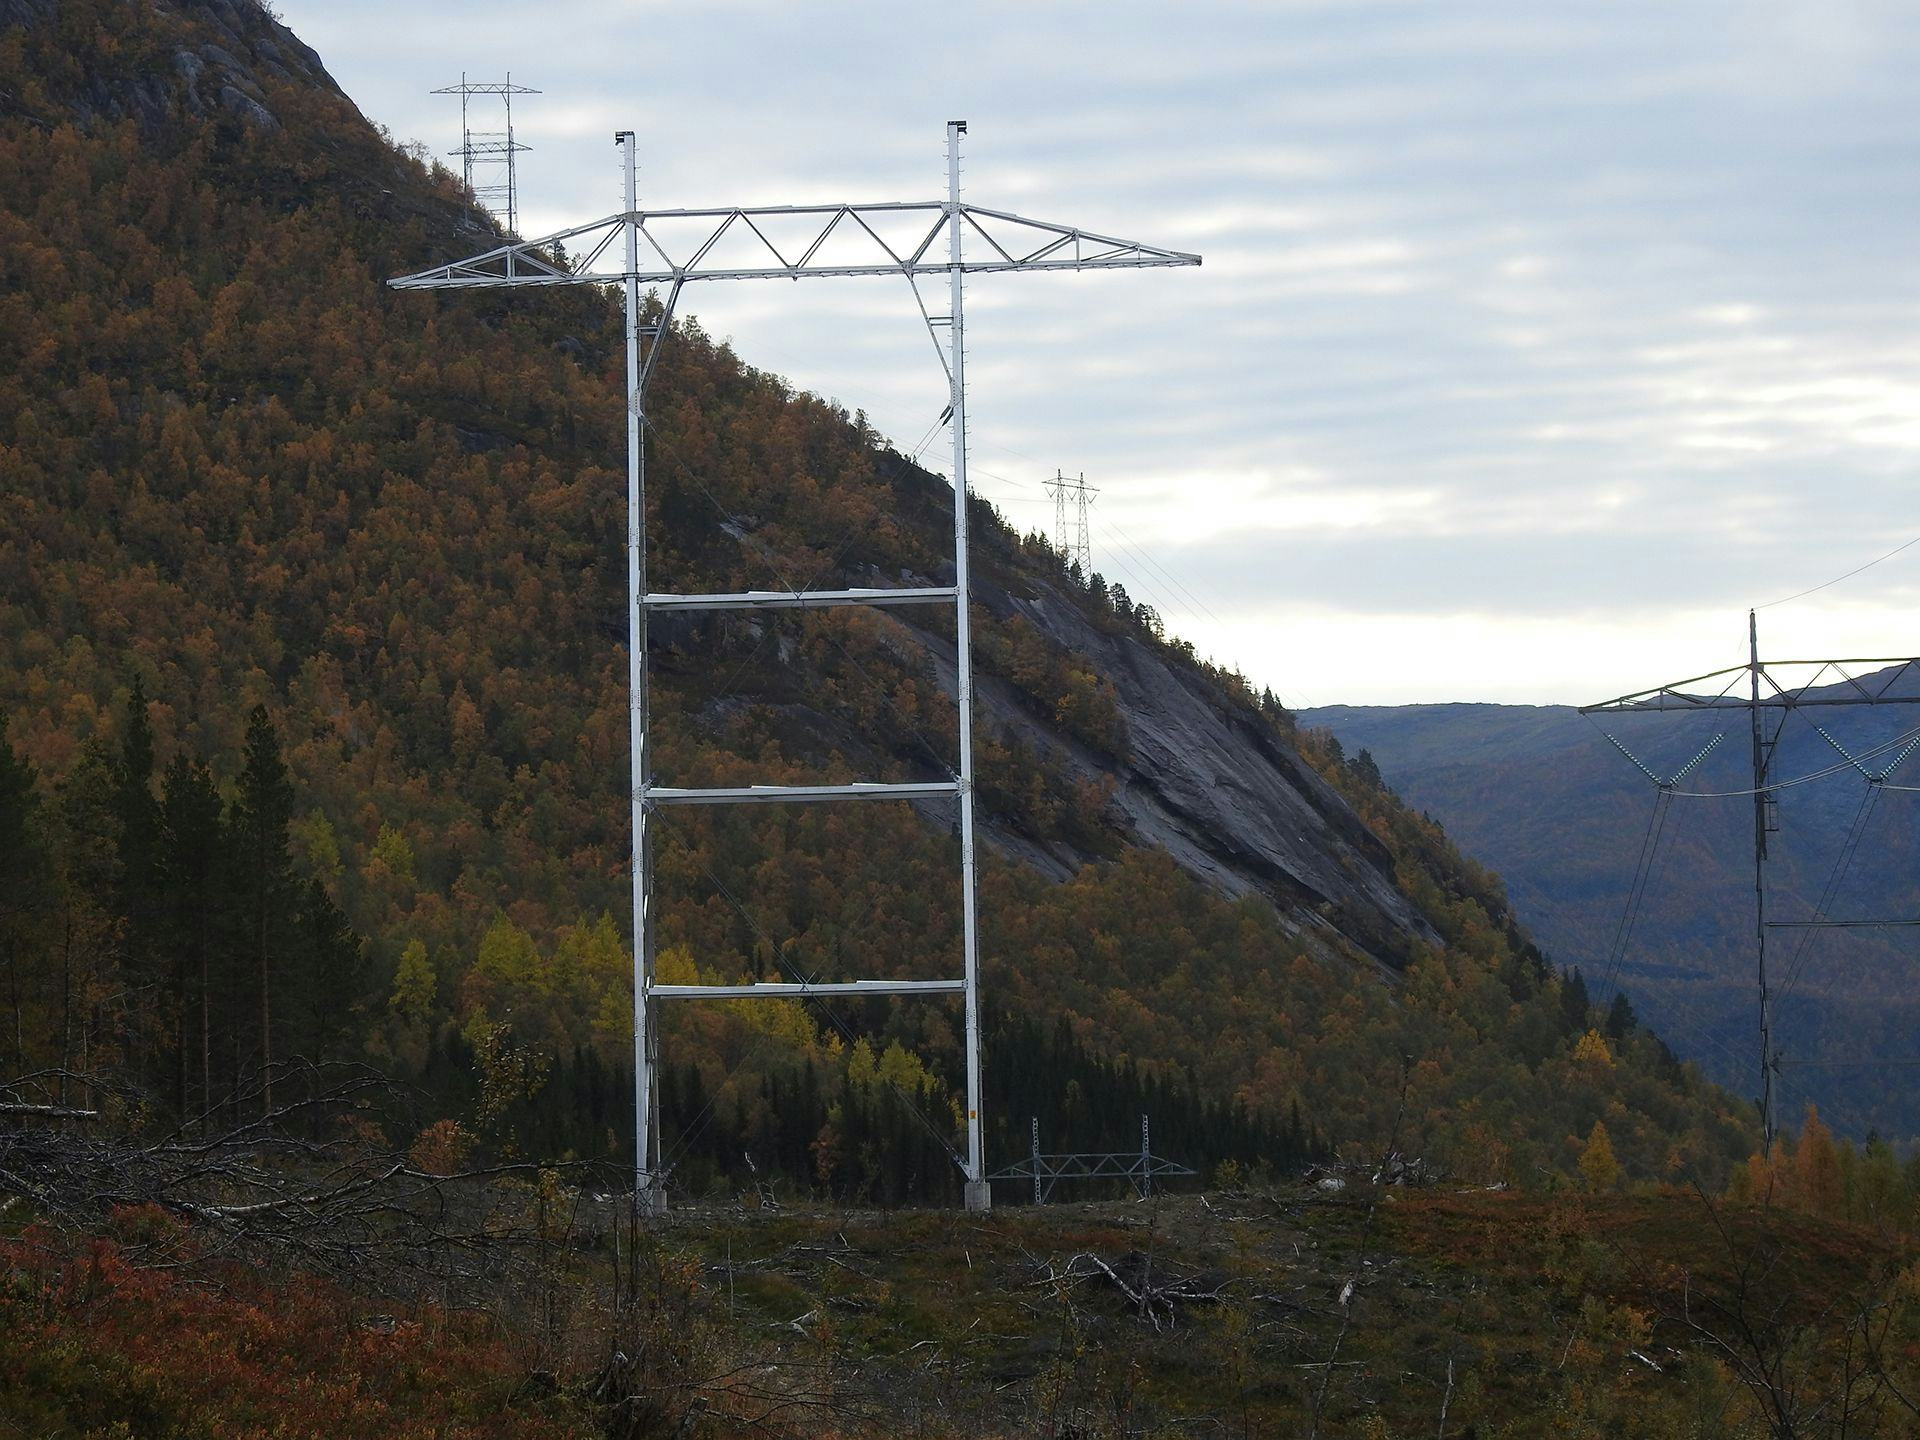 A large electricity pylon situated on a forested hillside